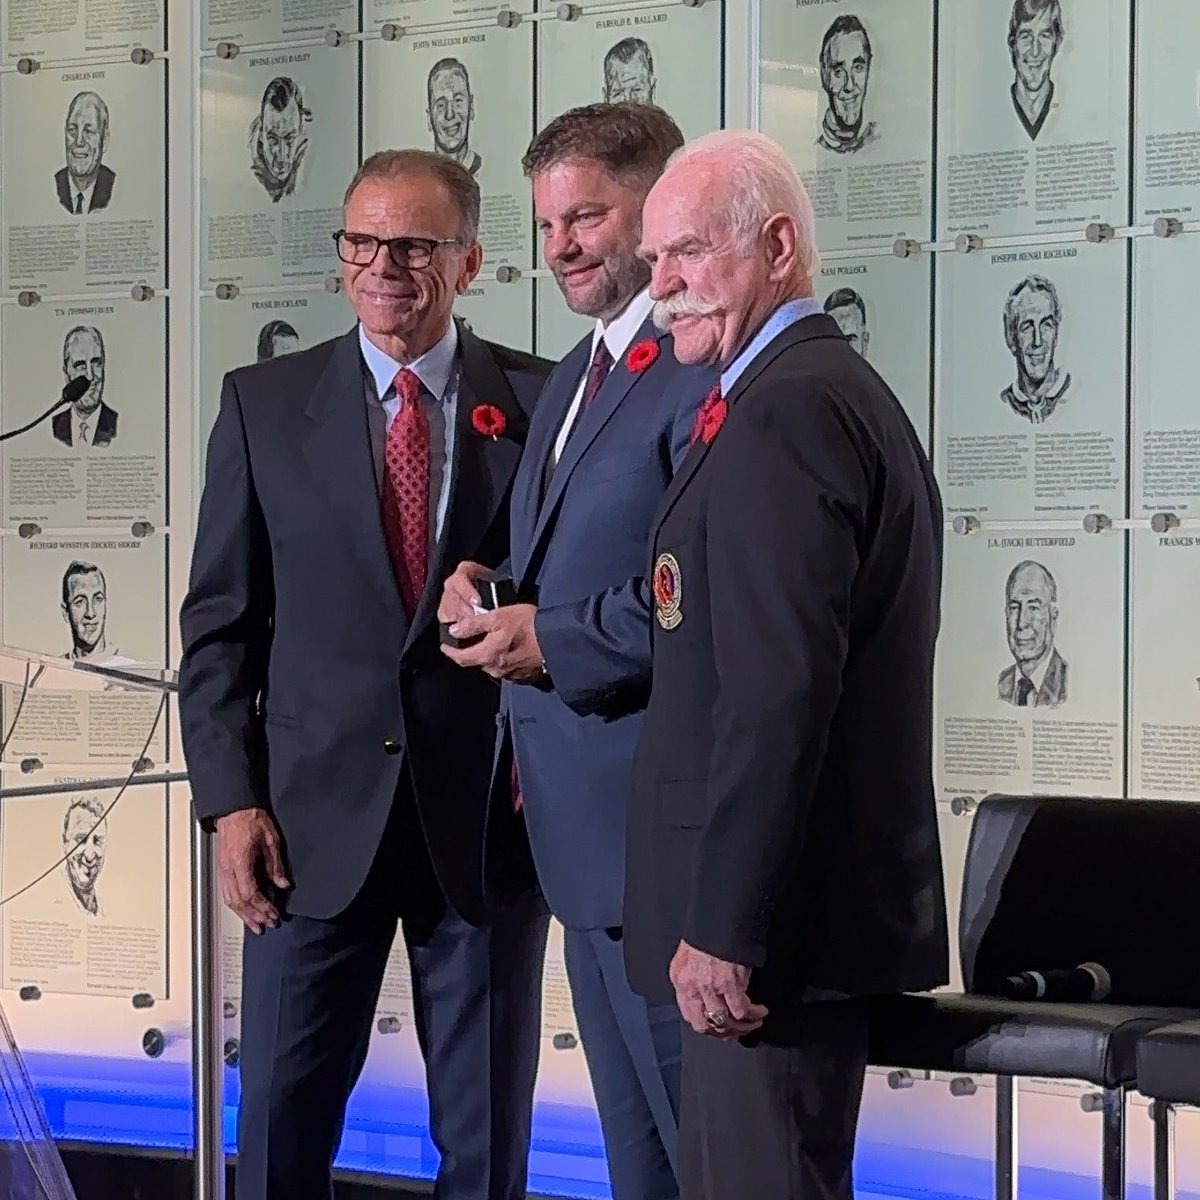 Eric Lacroix, son of Pierre Lacroix, receives his father’s Honoured Member Ring by @BaronRings from Mike Gartner #HHOF2001, Chair of the Selection Committee and Lanny McDonald #HHOF1992, Chair of the Board

#HHOF2023 | #HHOF